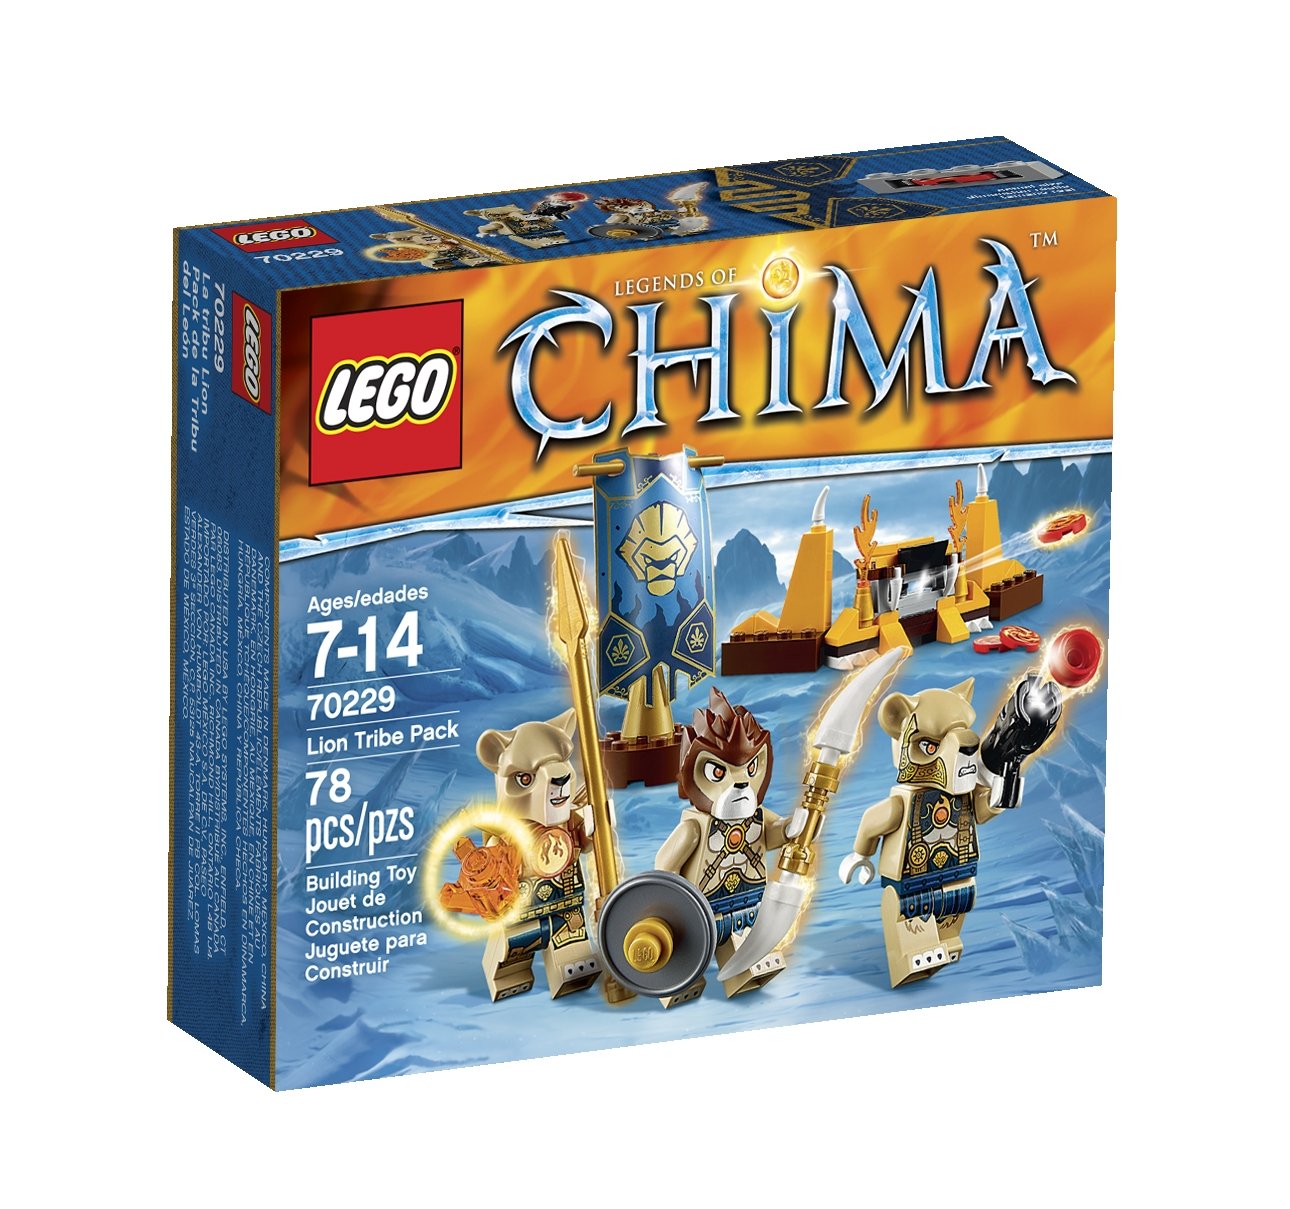 9 Best LEGO Chima Sets 2022 - Buying Guide & Reviews 5